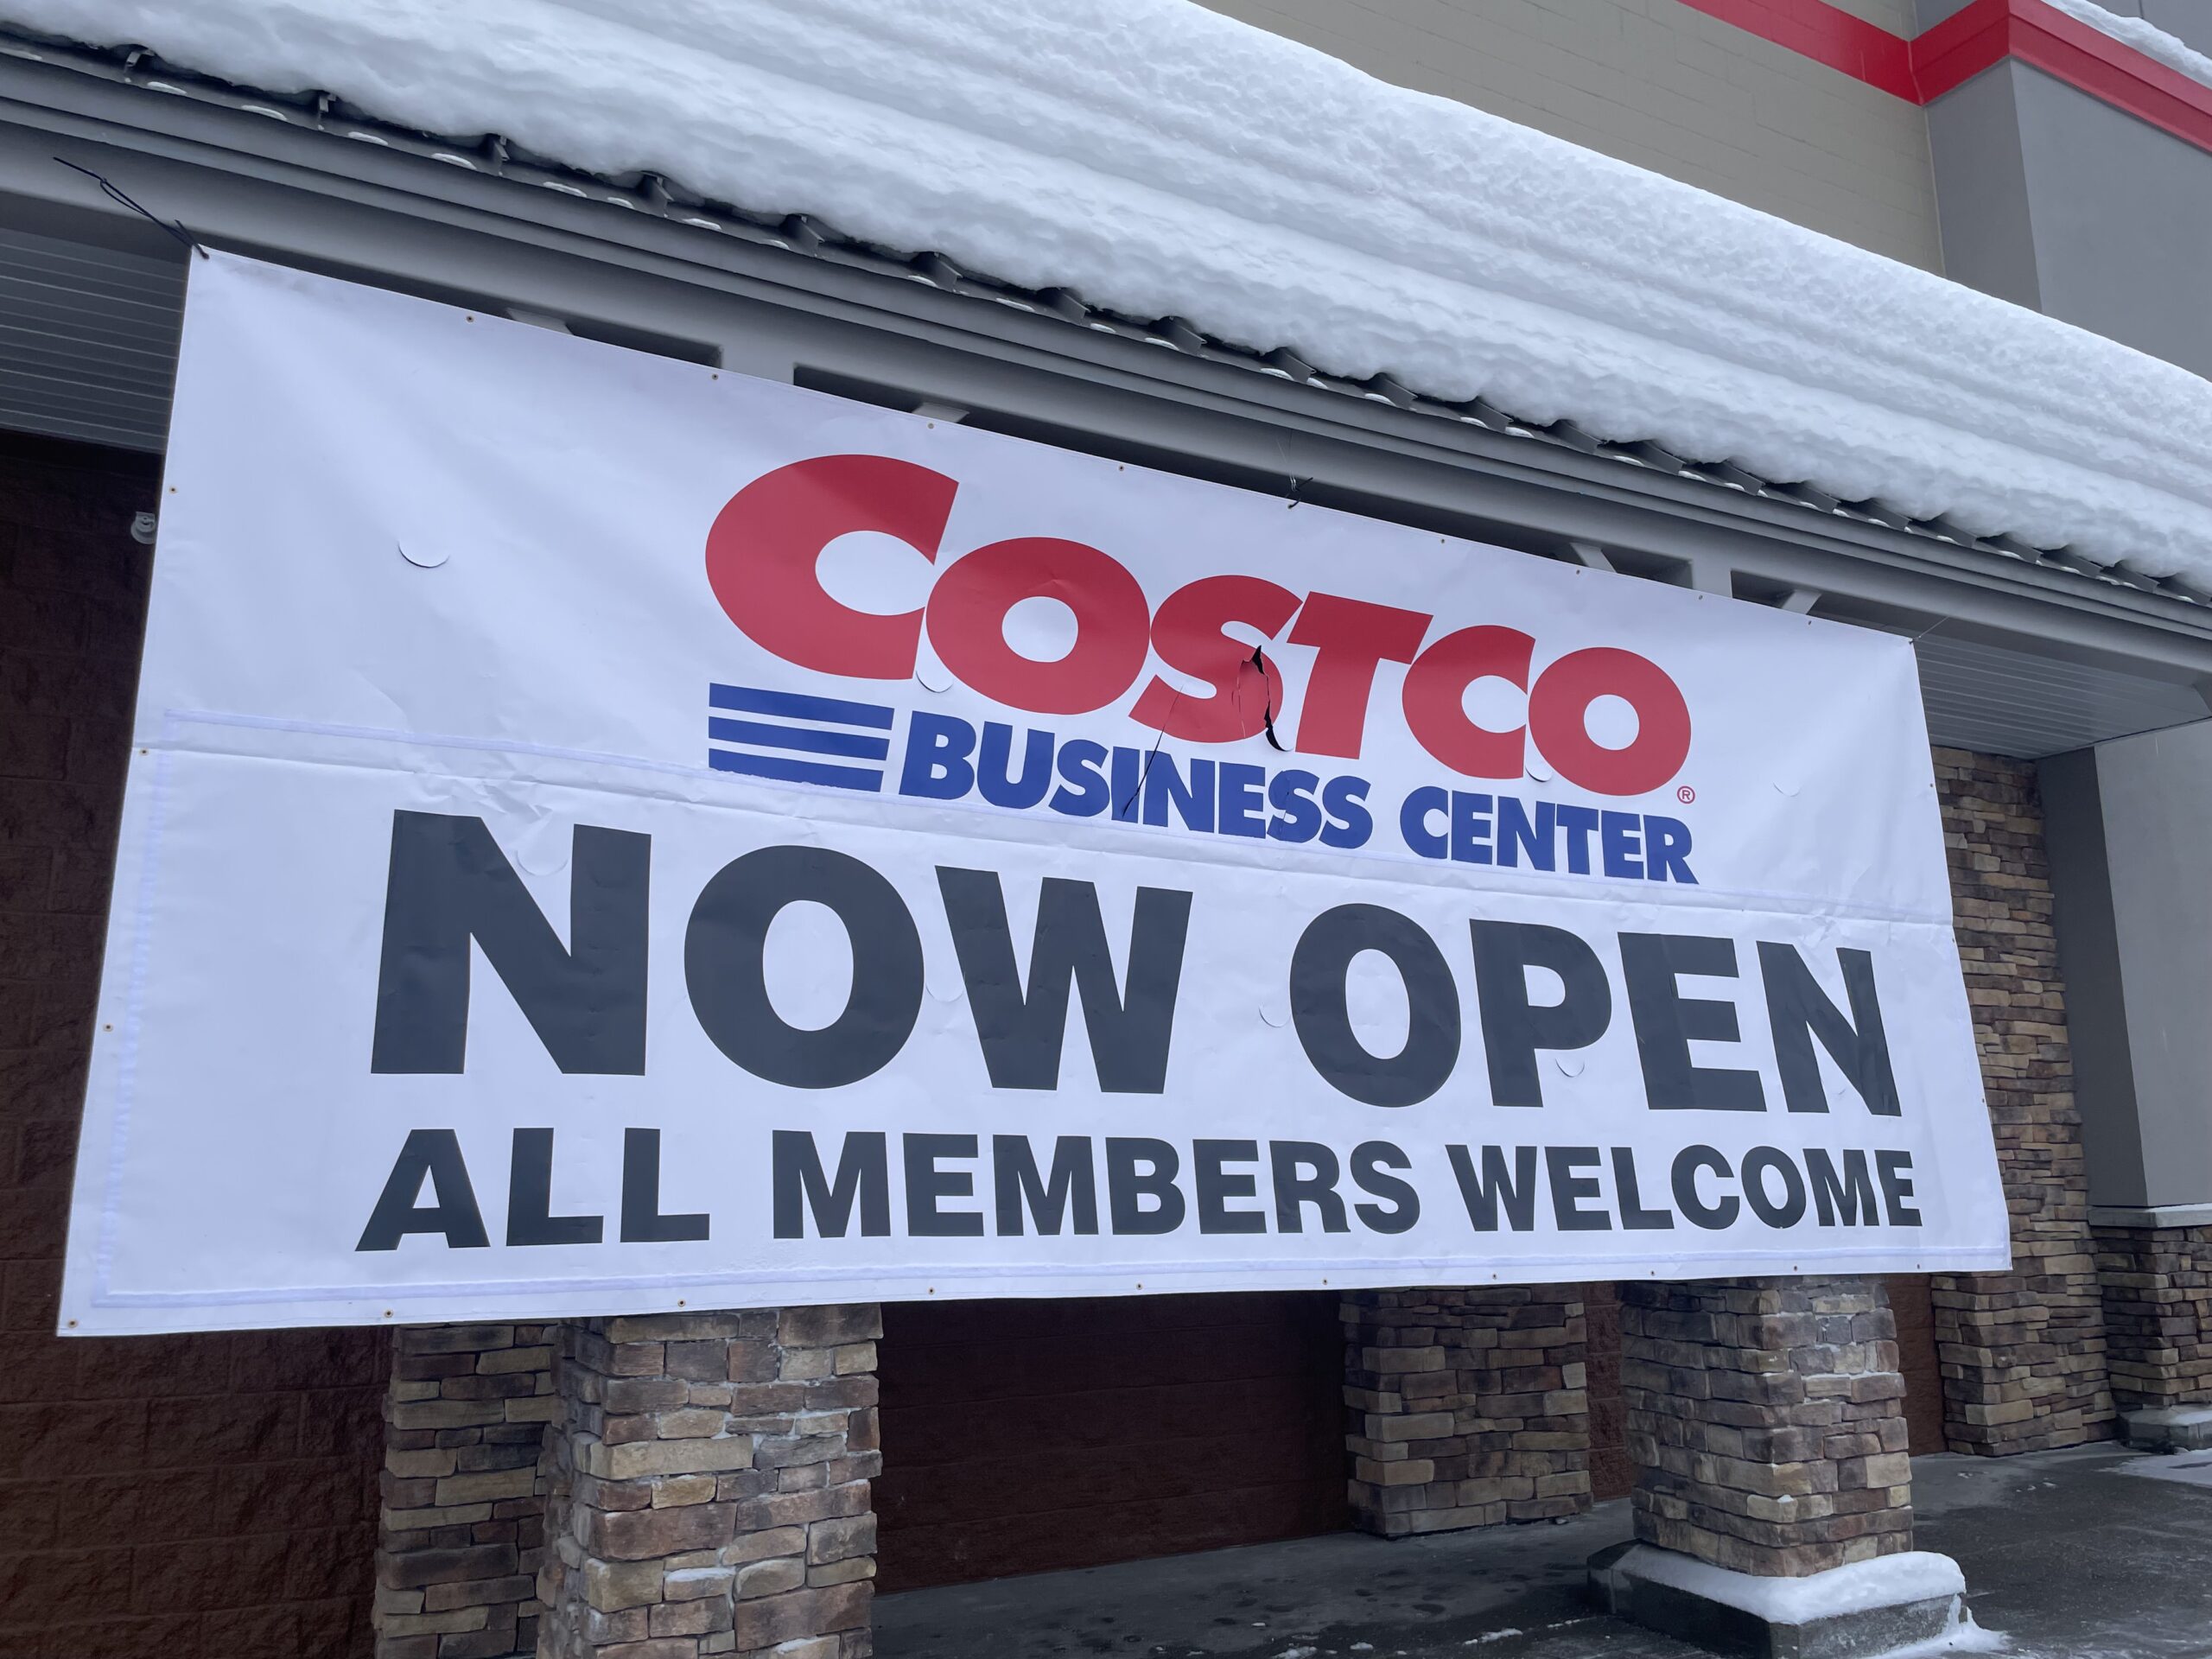 The Costco Business Center opening sign.